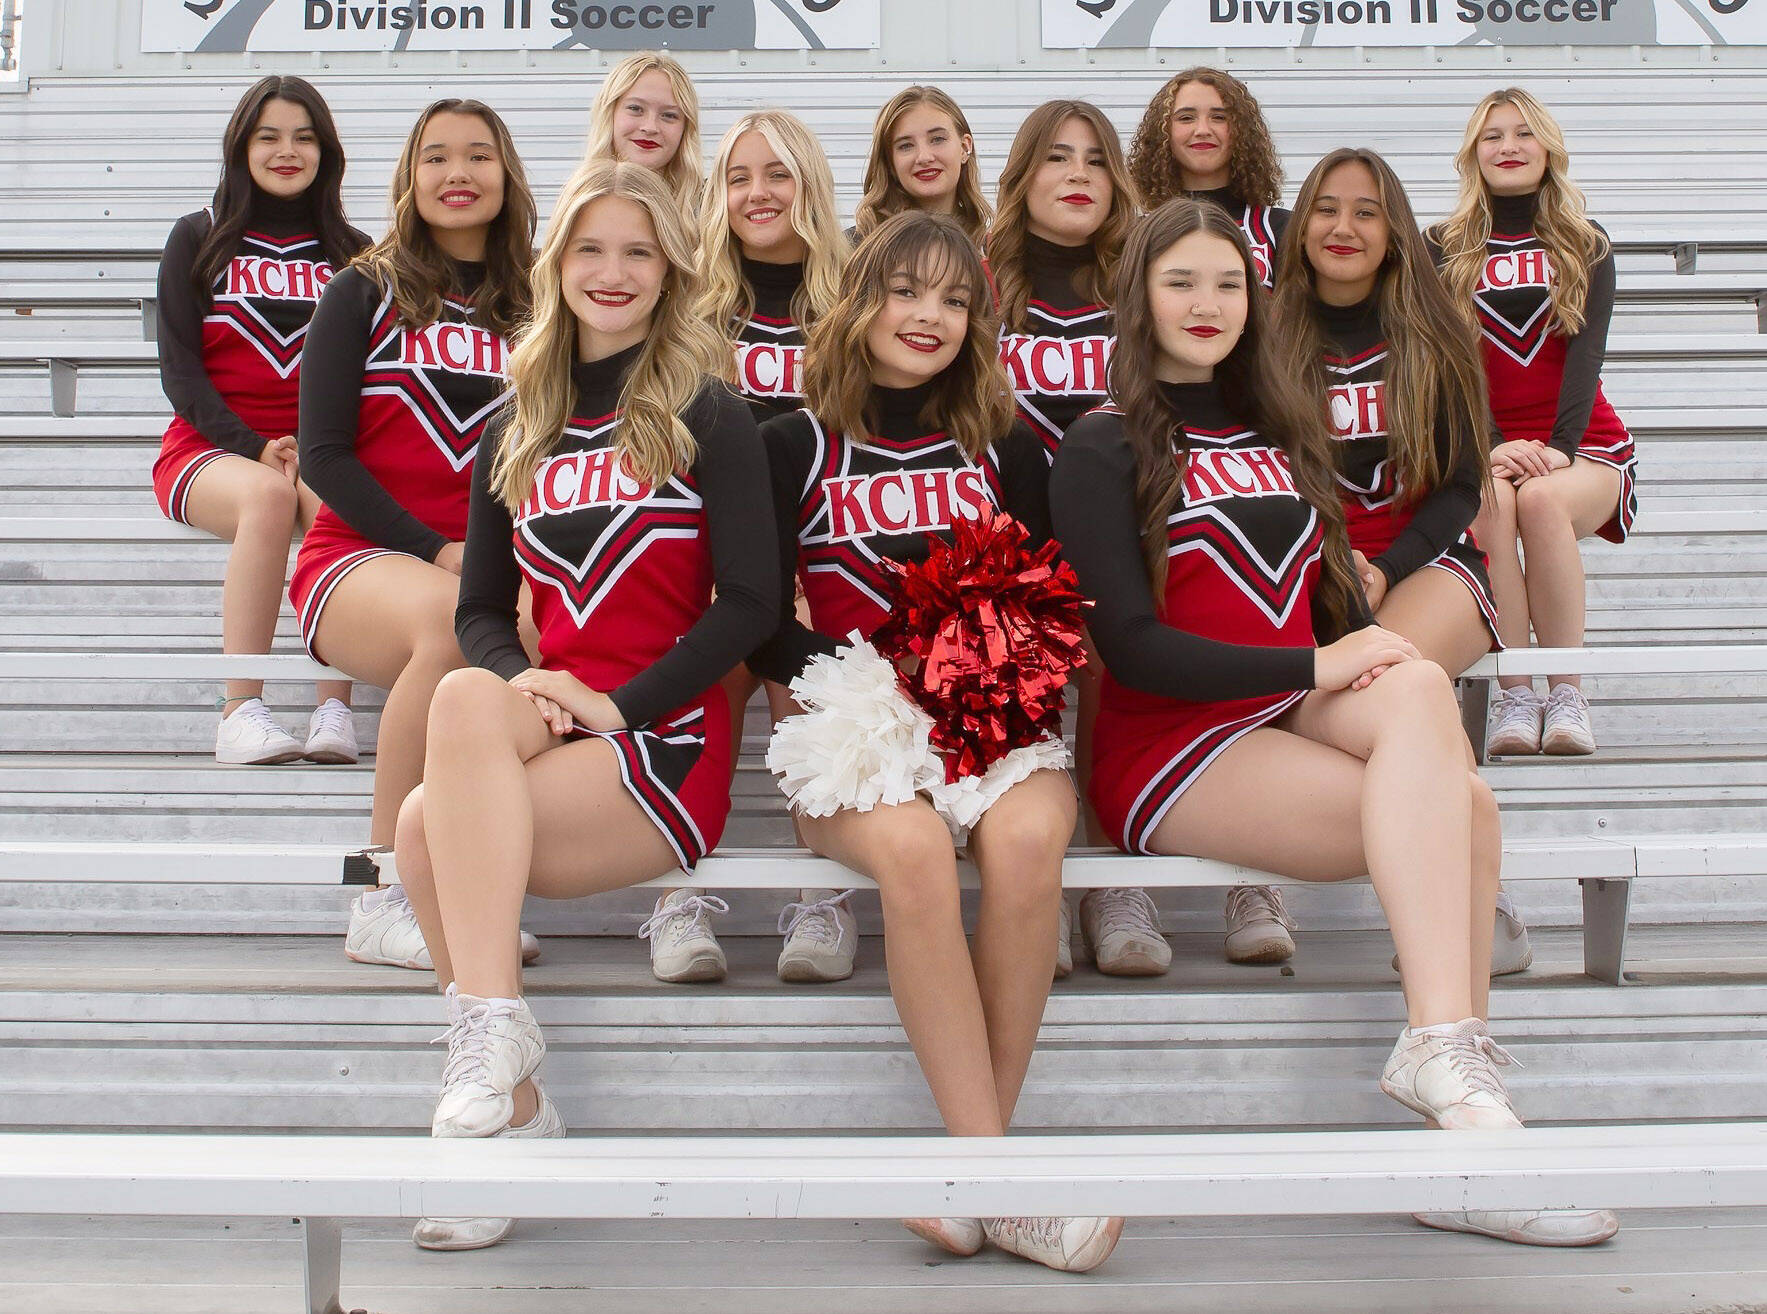 The Kenai Central cheerleading team. Top row, left to right: Alicia Perez, Truly Hondel, Kayani Whicker, Kimber Moore, Cara Graves. Middle row, left to right: Alex Nelson, Scarlett Gibson, Caitlyn Martin, Ellee Pancoast. Bottom row, left to right: Makenzie Harden, Ella Romero, Sylvia McGraw.